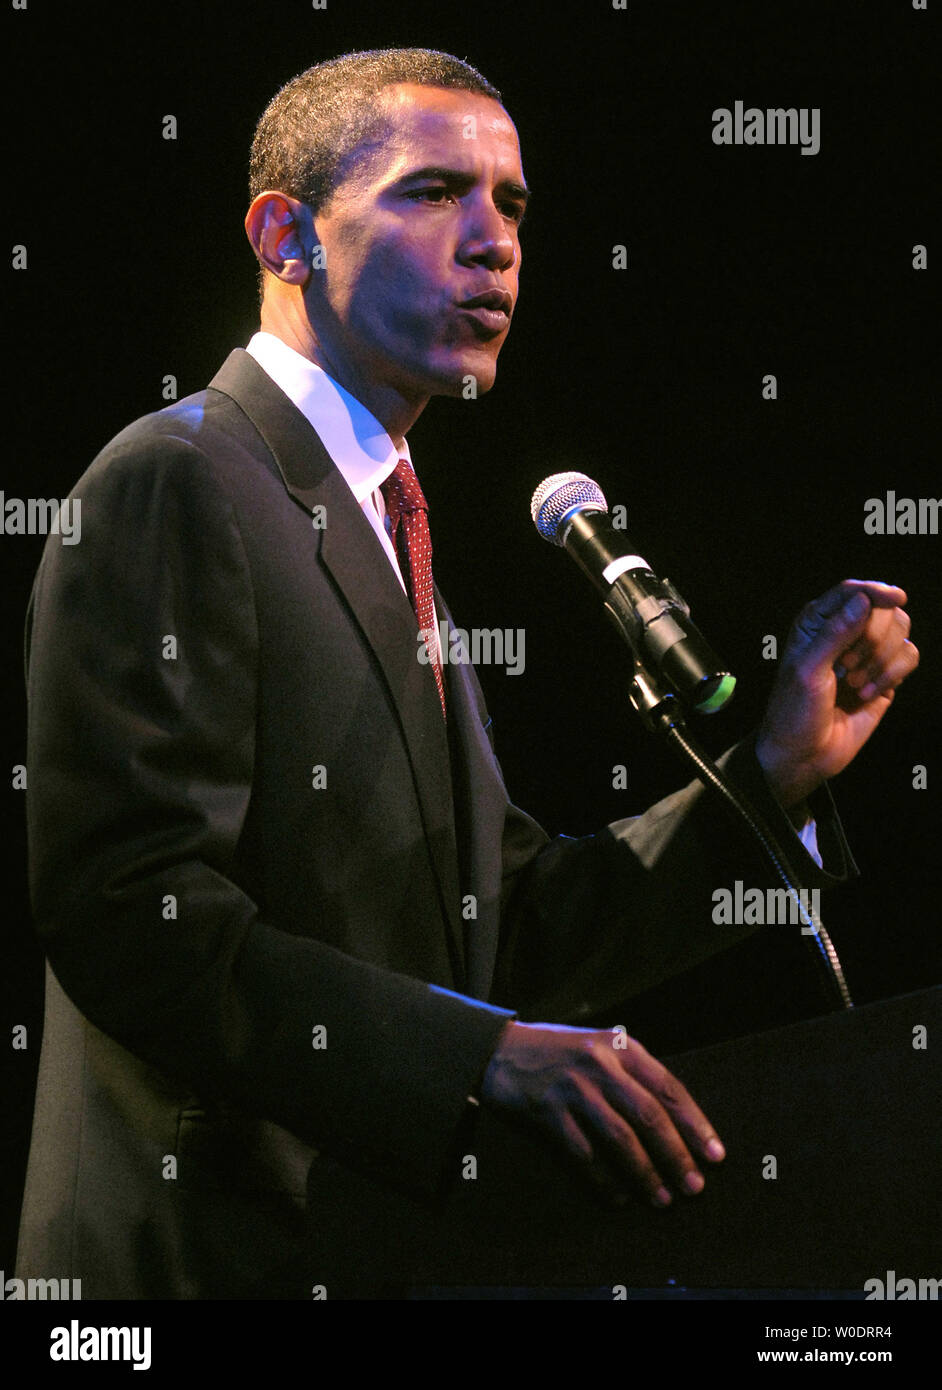 Presidential hopeful Sen. Barack Obama (D-IL) delivers remarks at The Town Hall Educational Arts and Recreational Campus community center in Washington on July 18, 2007. Obama said if elected President he would vow to strengthen welfare and health care services. (UPI Photo/Kevin Dietsch) Stock Photo